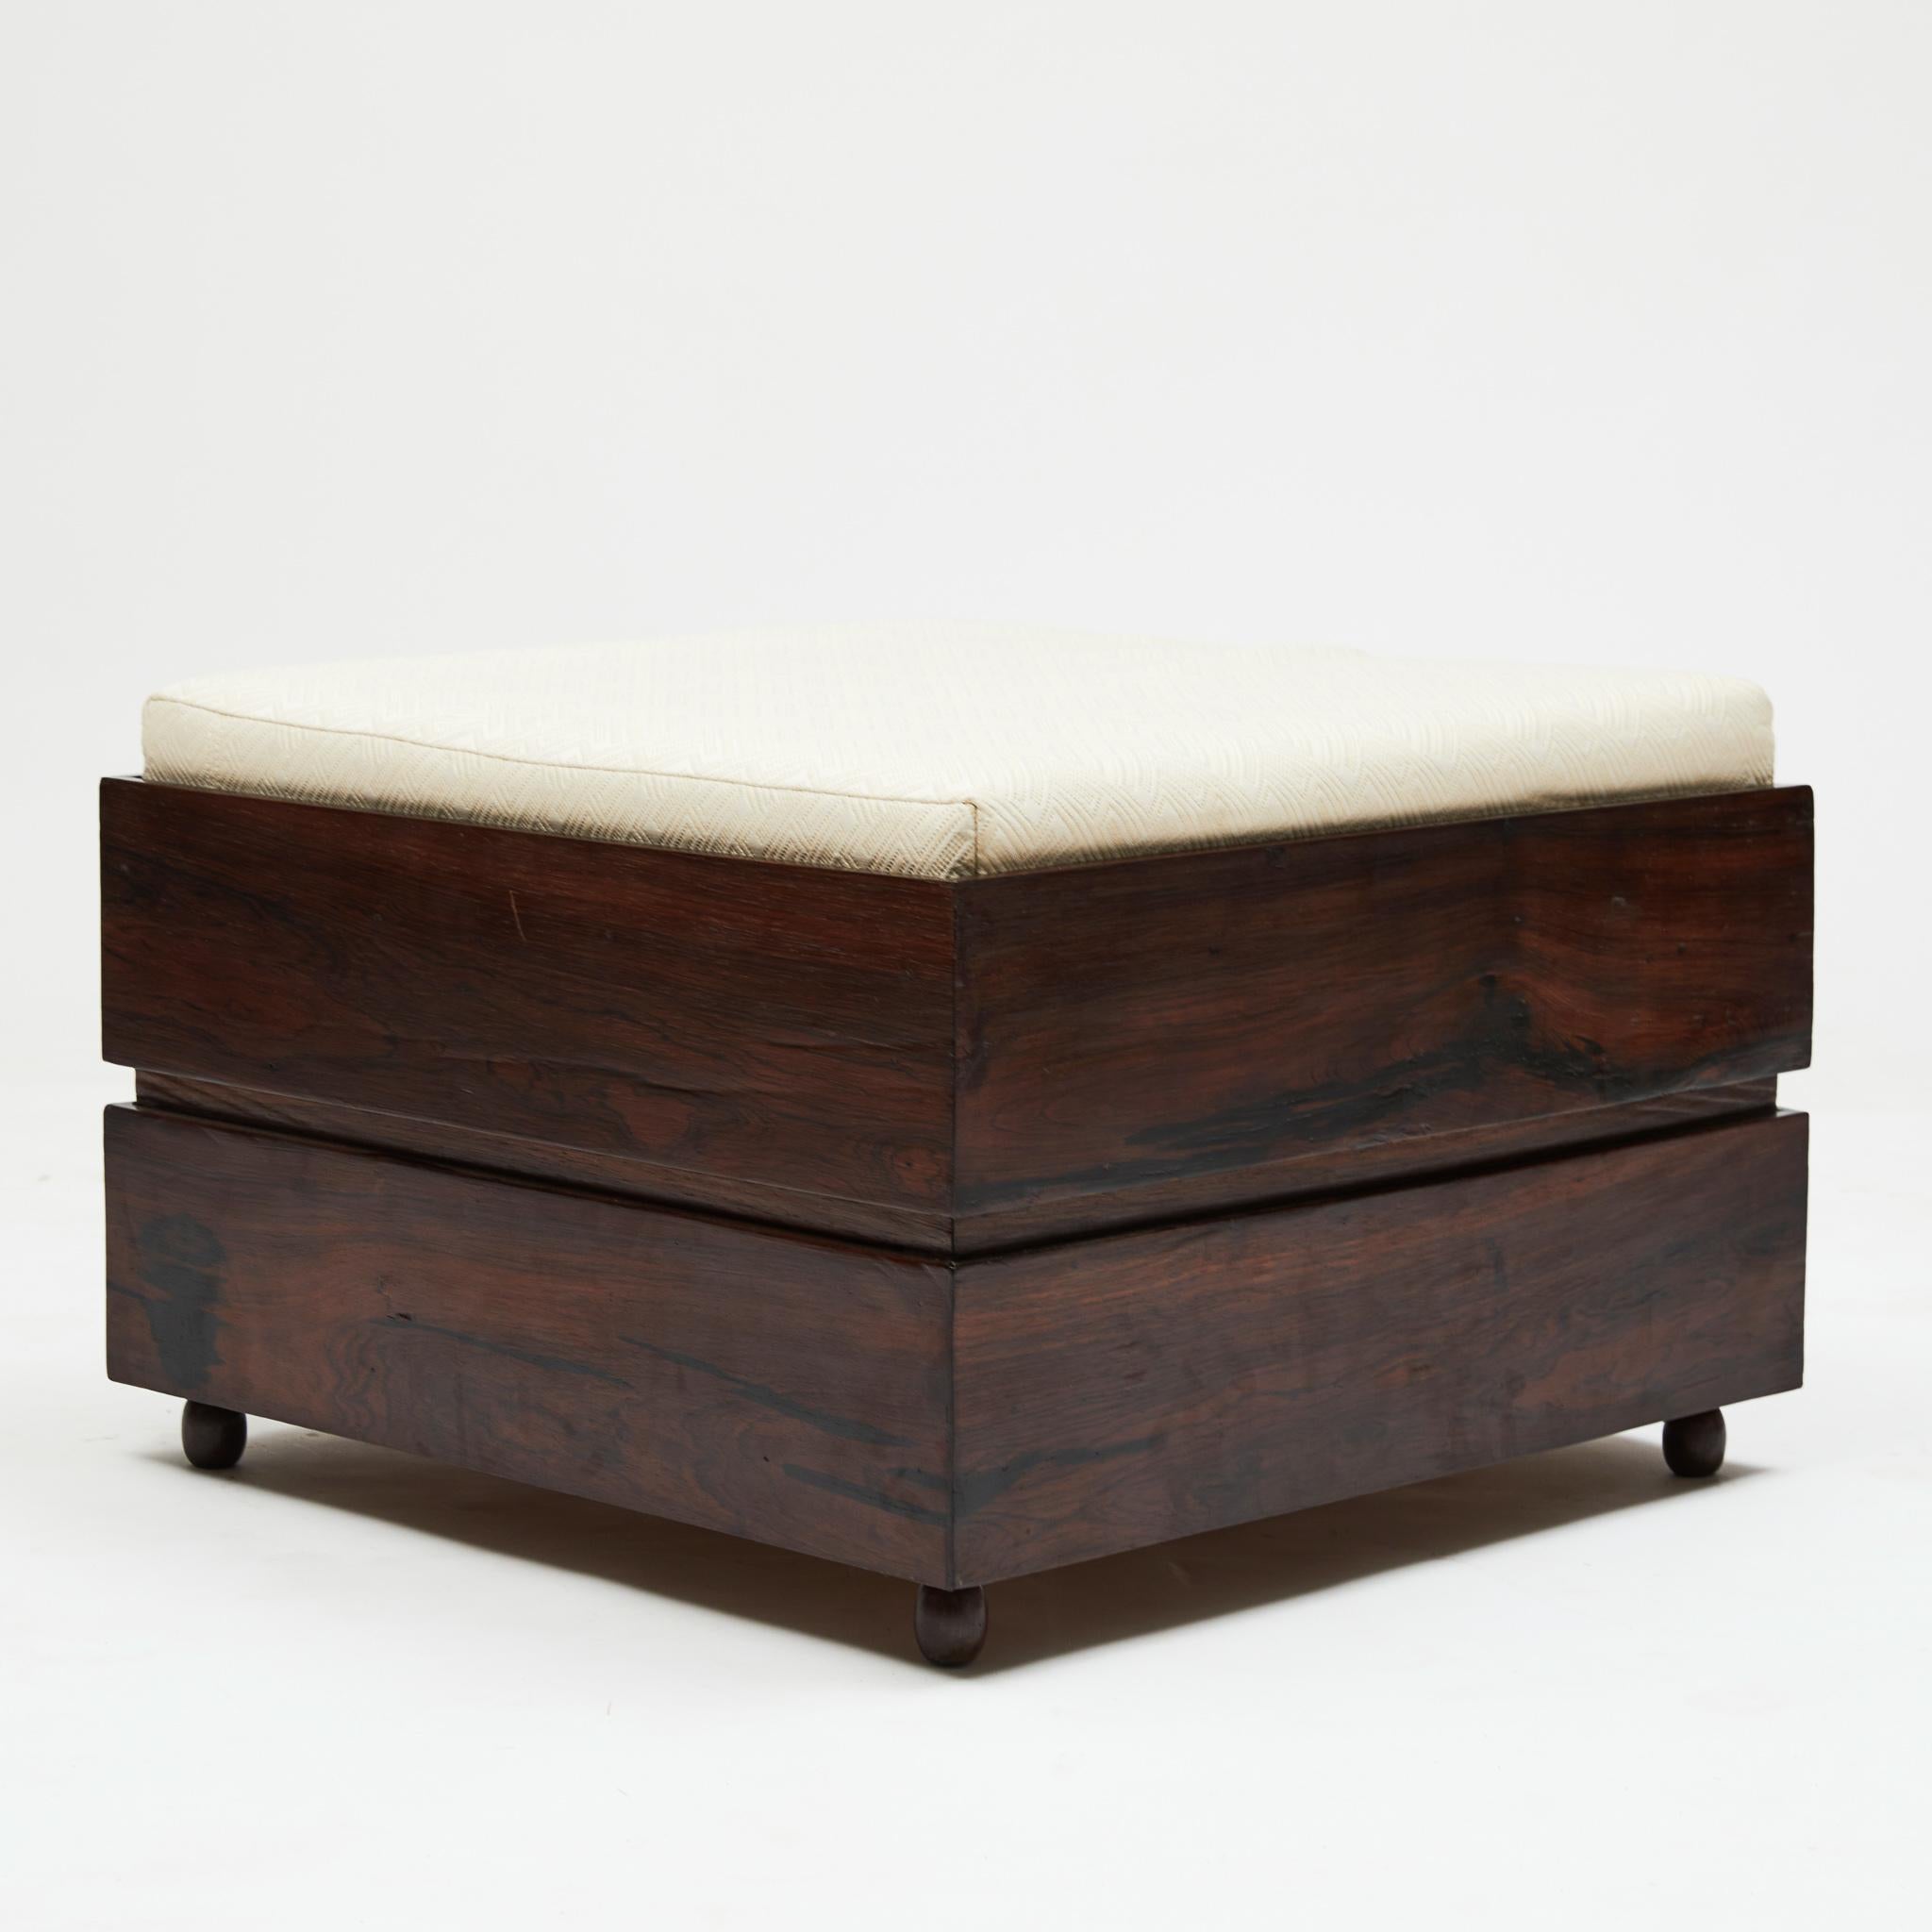 Discover the beauty of this stunning Brazilian modern stool/trunk crafted from durable Brazilian rosewood, also known as jacaranda. Adorned with white cotton fabric loose cushions for both the seat and backrest, these remarkable pieces are a